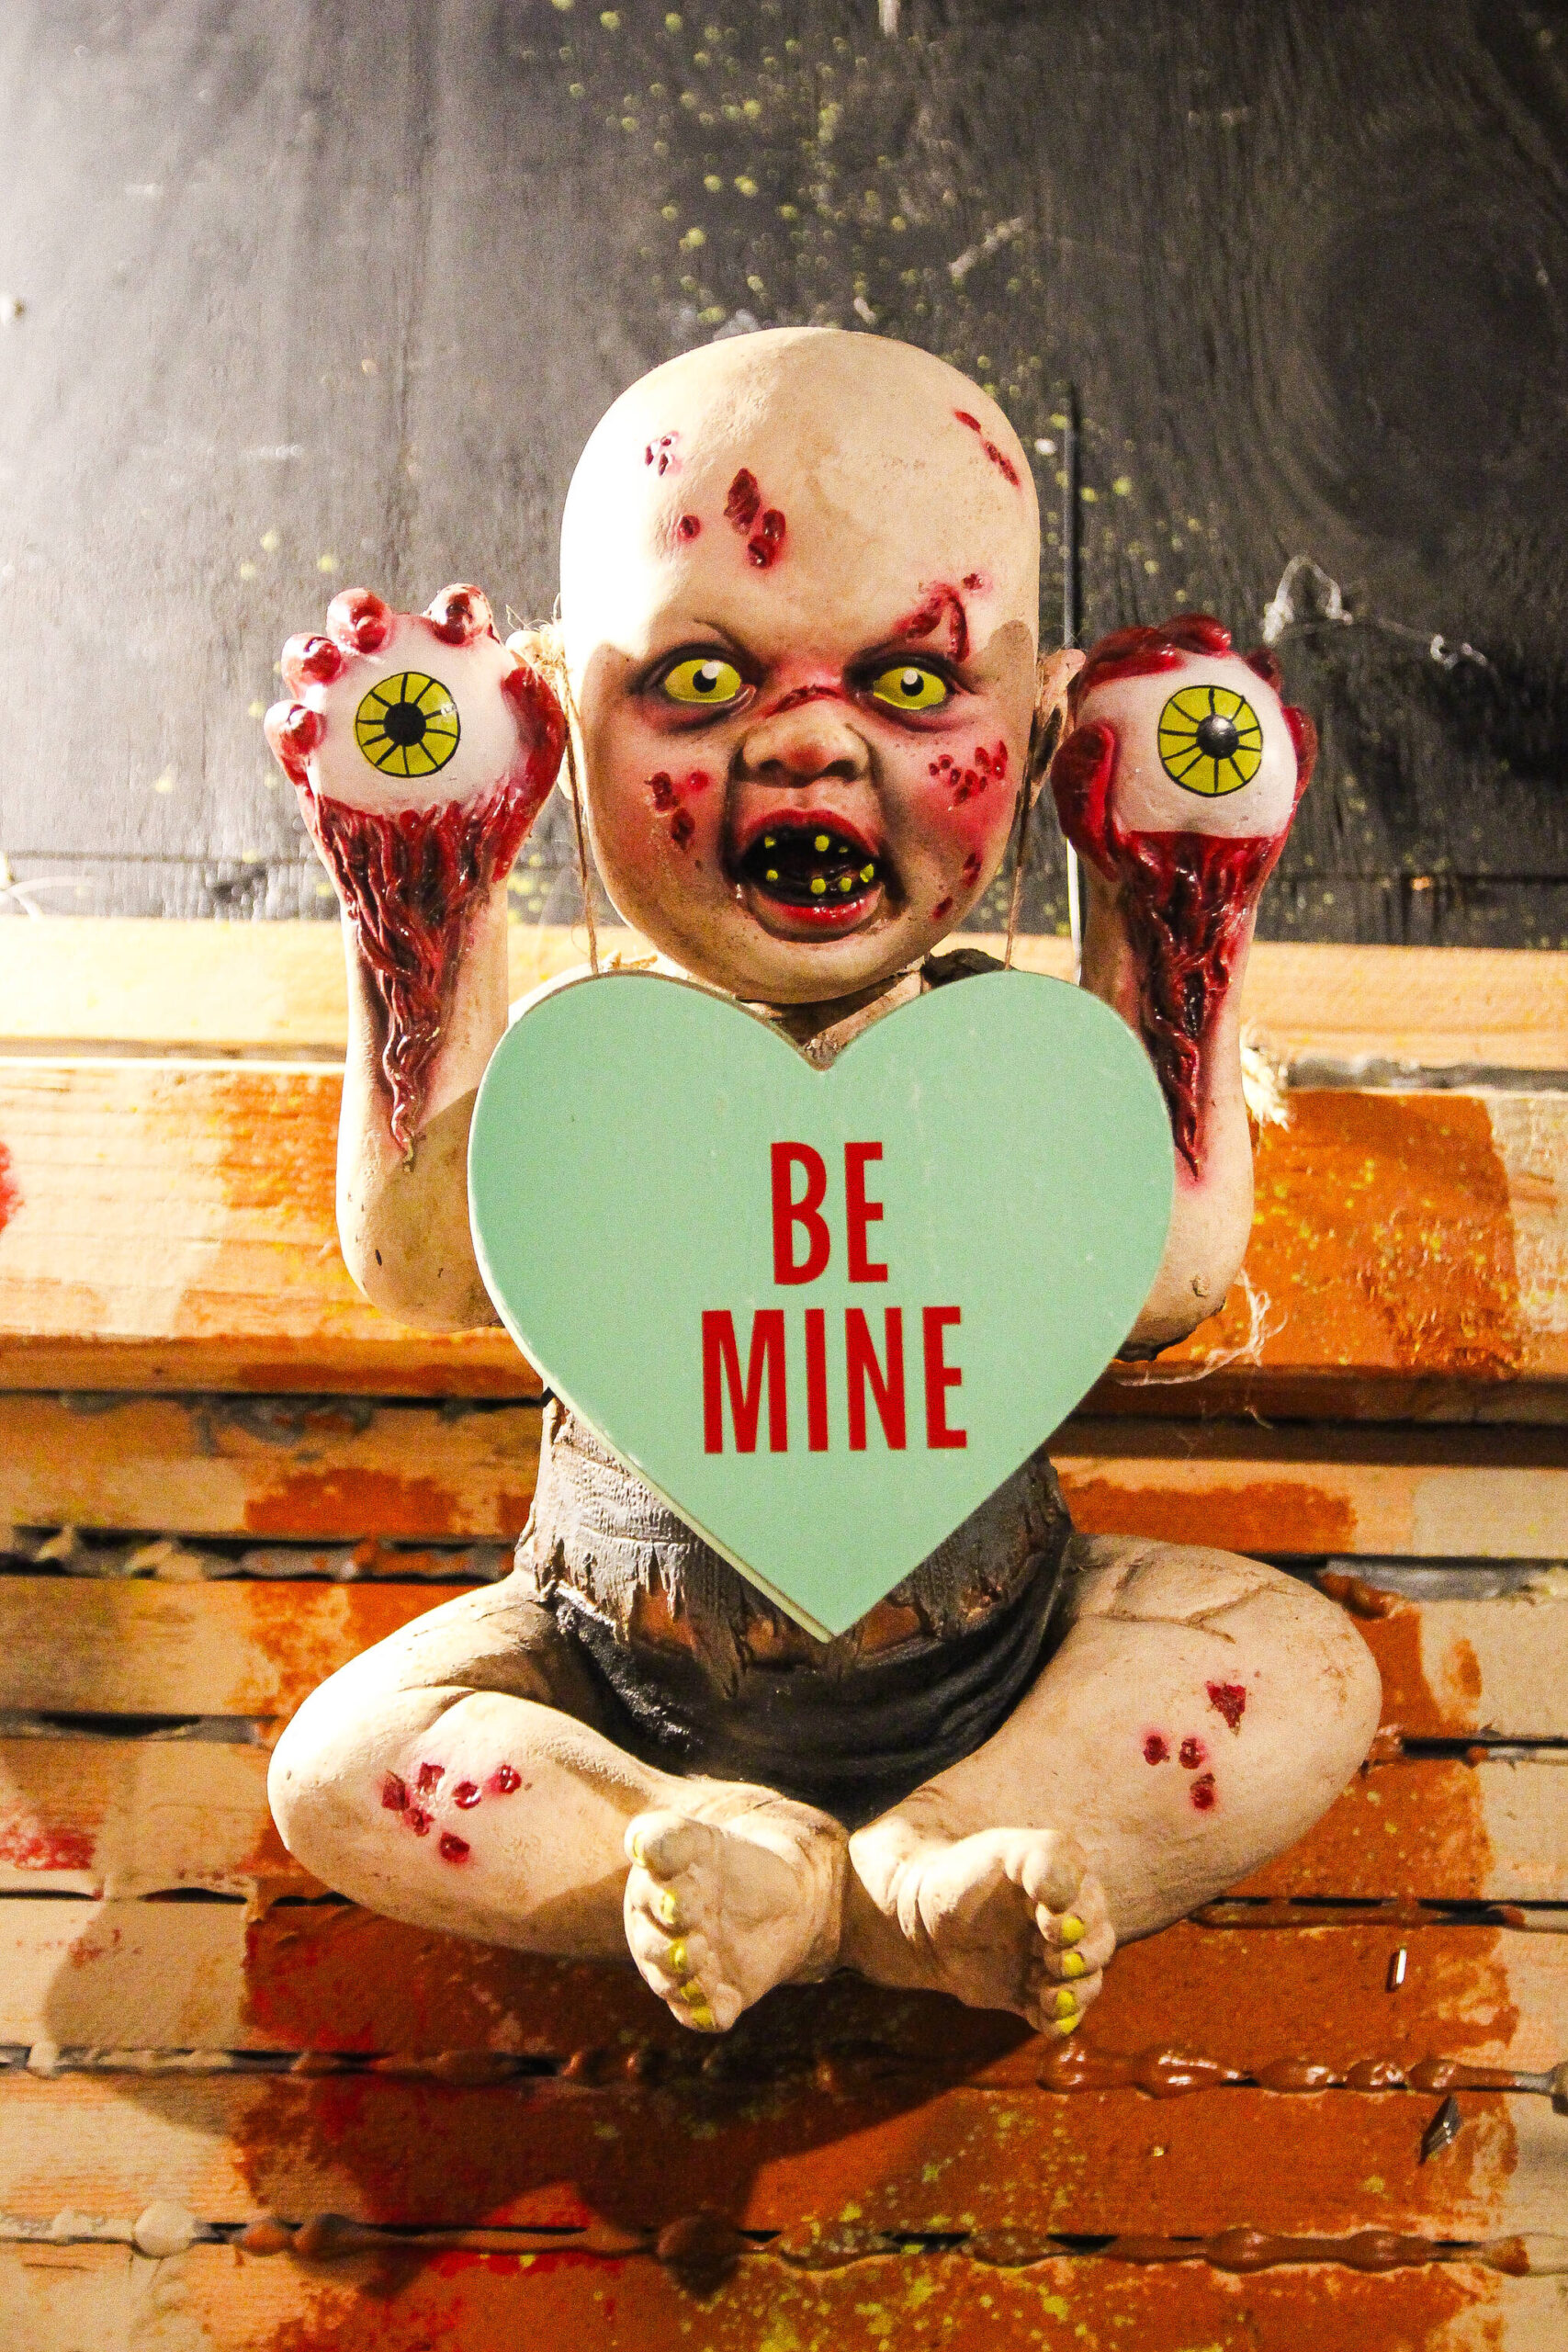 Possessed babies enjoy celebrating Valentine’s Day as well. (Photo by Luisa Loi)